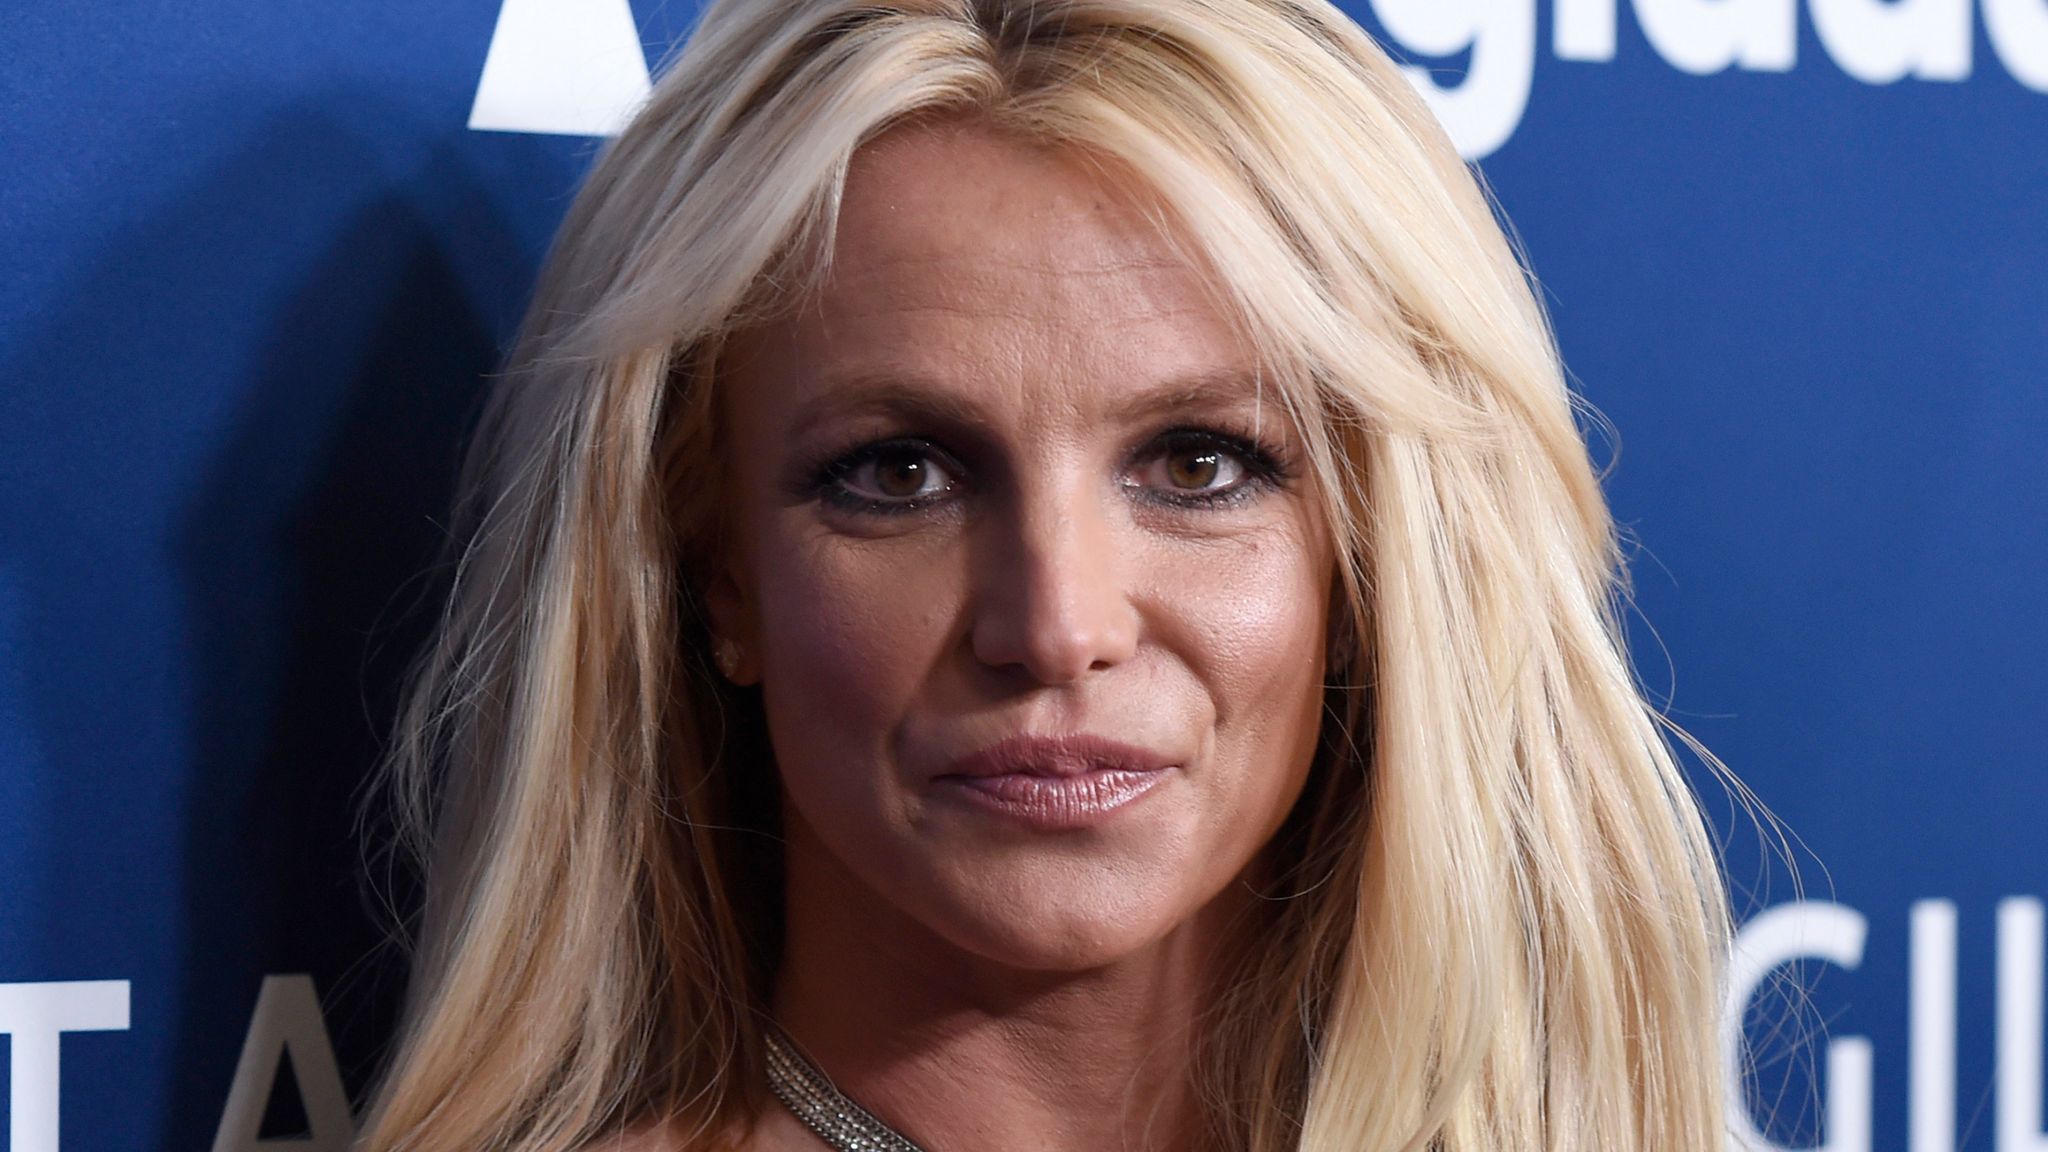 Britney spears: When is Britney Spears getting on the stage again